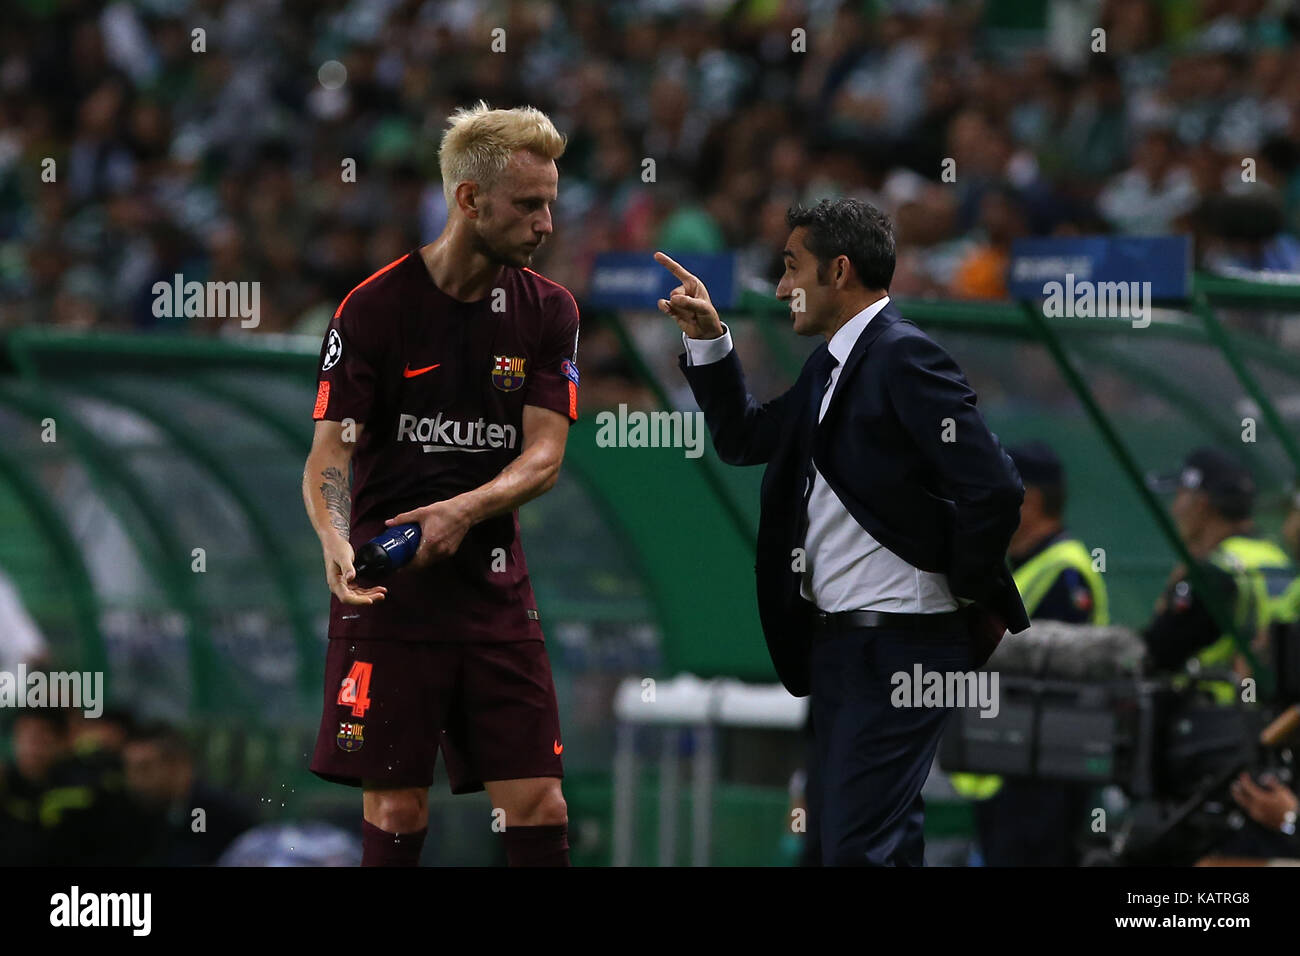 Lisbon, Portugal. 27th Sep, 2017. Barcelona«s midfielder Ivan Rakitic from Croatia (L) and Barcelona«s head coach Ernesto Valverde from Spain (R) during the match between Sporting CP v FC Barcelona UEFA Champions League playoff match at Estadio Jose Alvalade on September 27, 2017 in Lisbon, Portugal. Credit: Bruno Barros/Alamy Live News Stock Photo